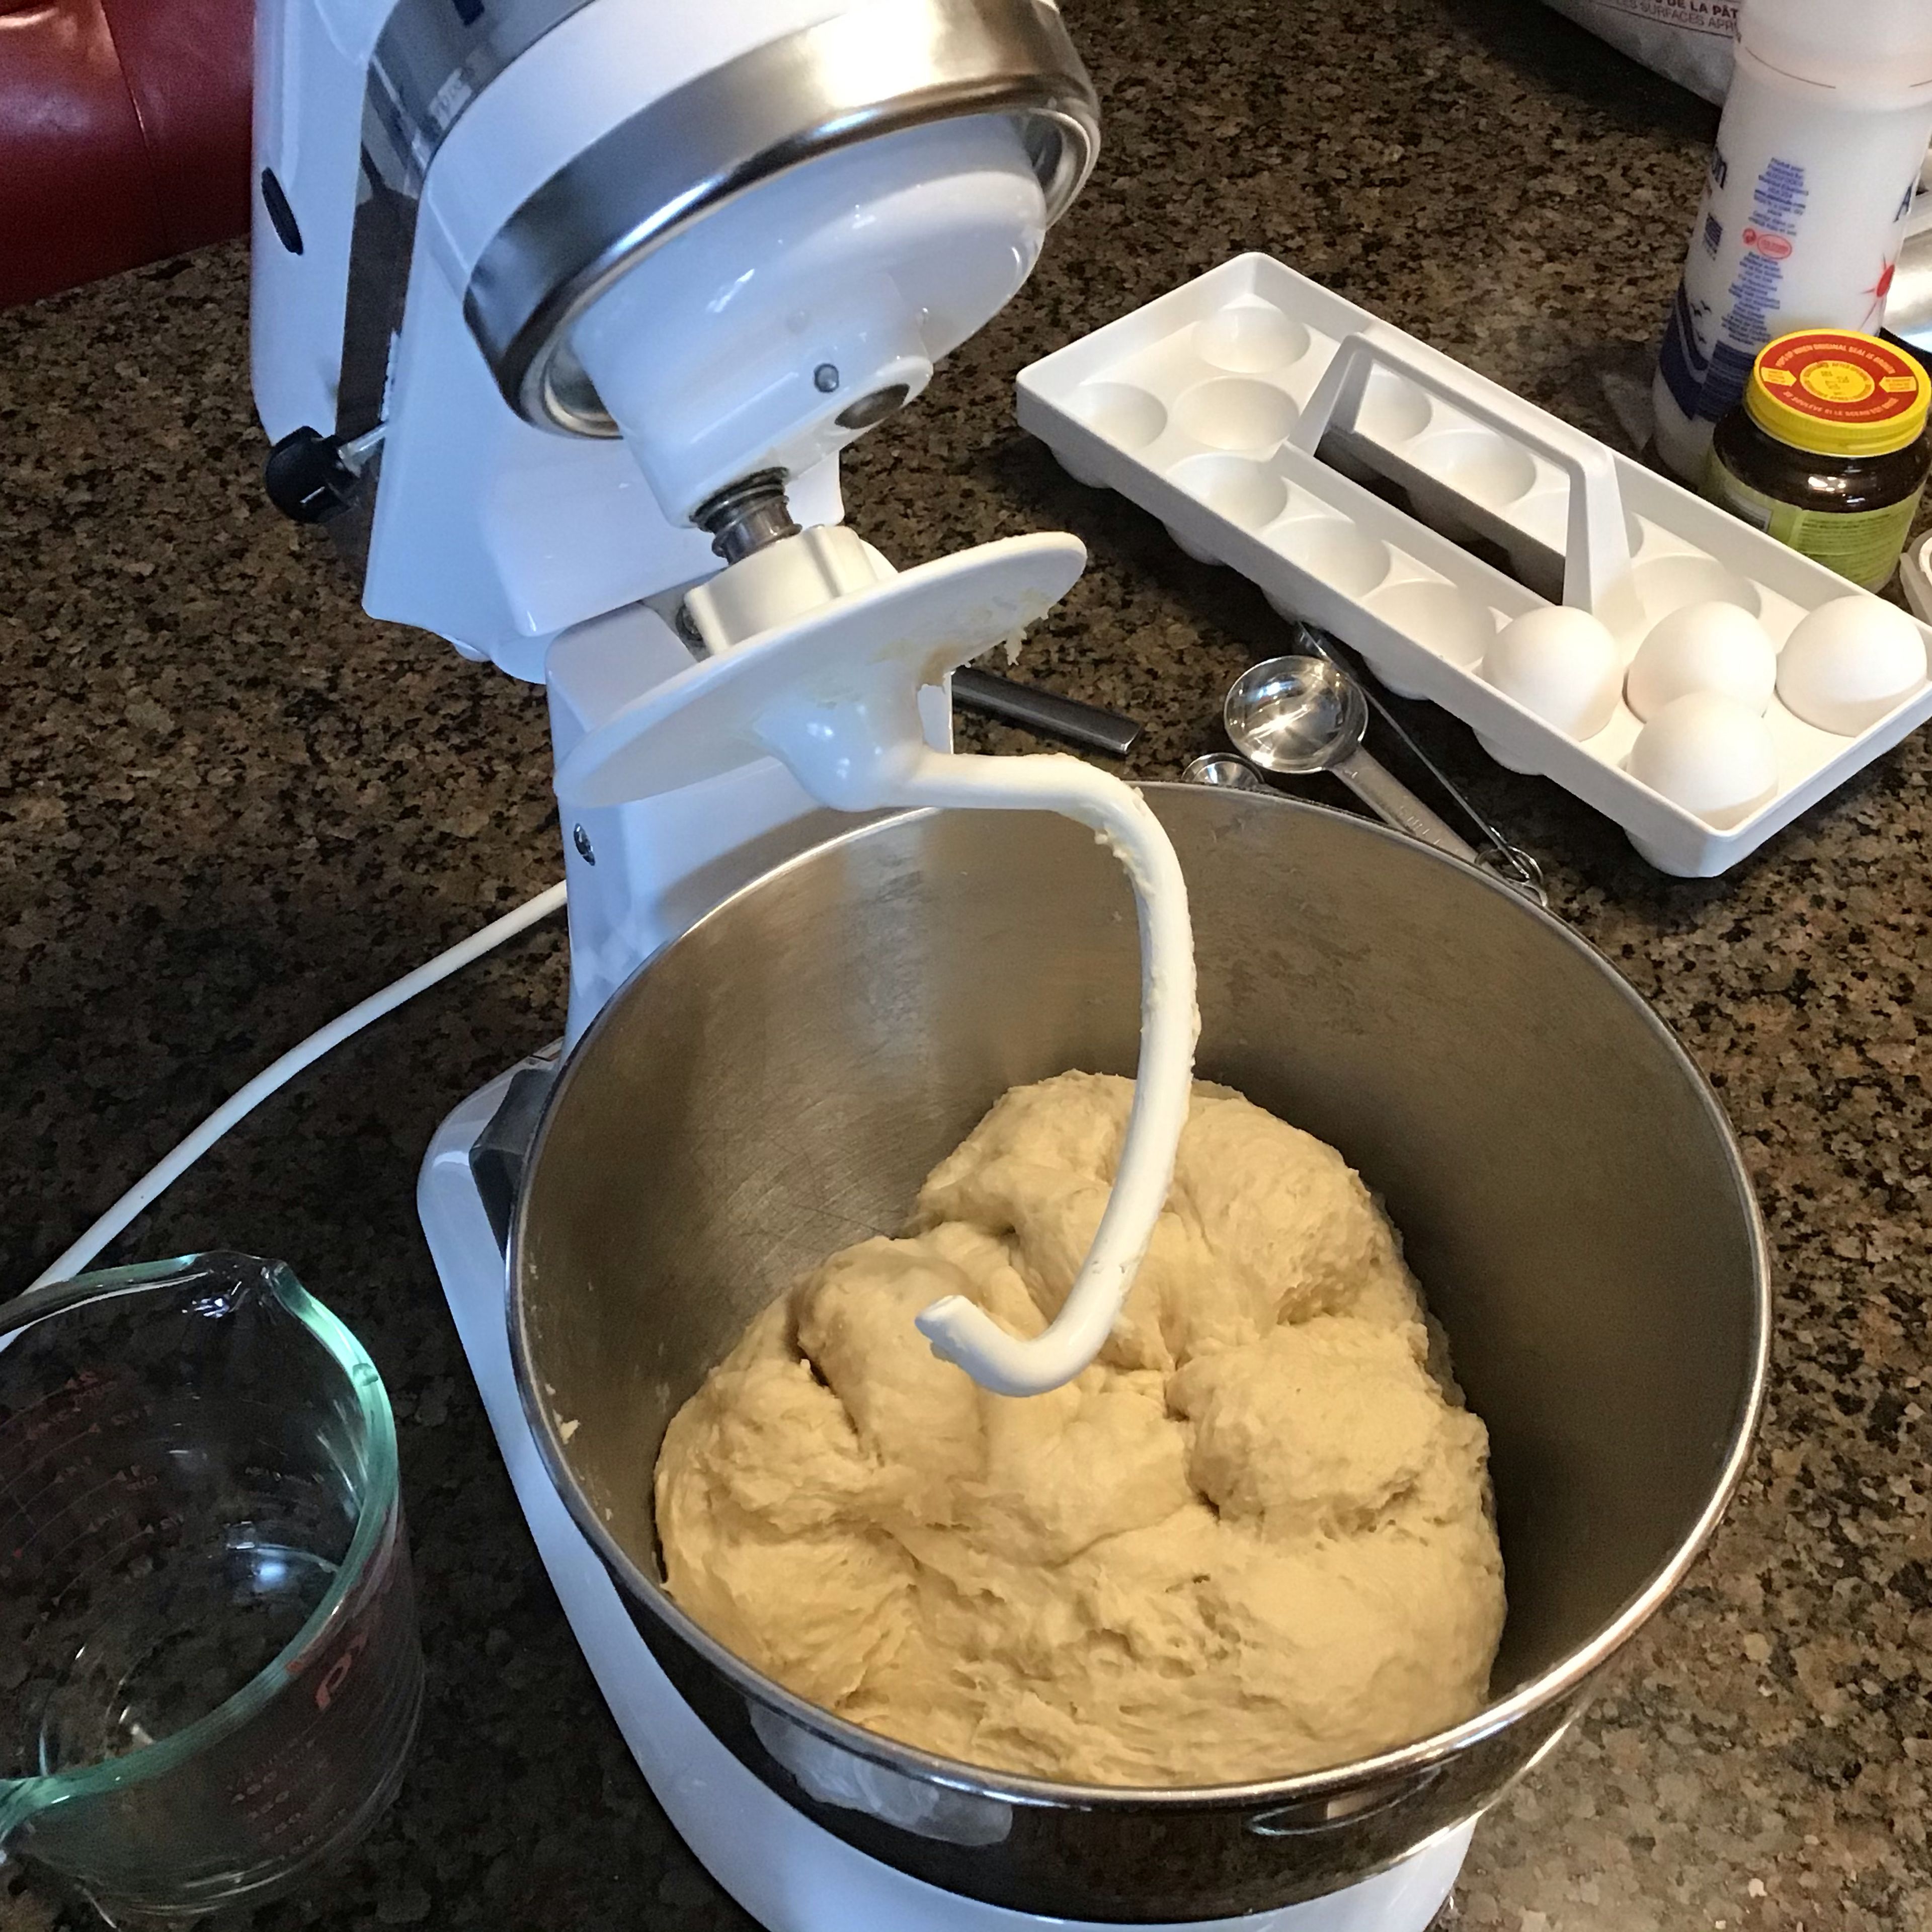 Let mixer run until dough comes together into a soft ball. If dough is not incorporating all of the flour, add 2 or 3 tablespoons of water and continue to run mixer for 3 to 4 minutes, until ball of dough comes together and it has a smooth texture. If dough is too wet and doesn’t form a ball, add 1 - 2 tbsp flour at a time and let each mix in until dough forms and comes away from sides of mixing bowl.